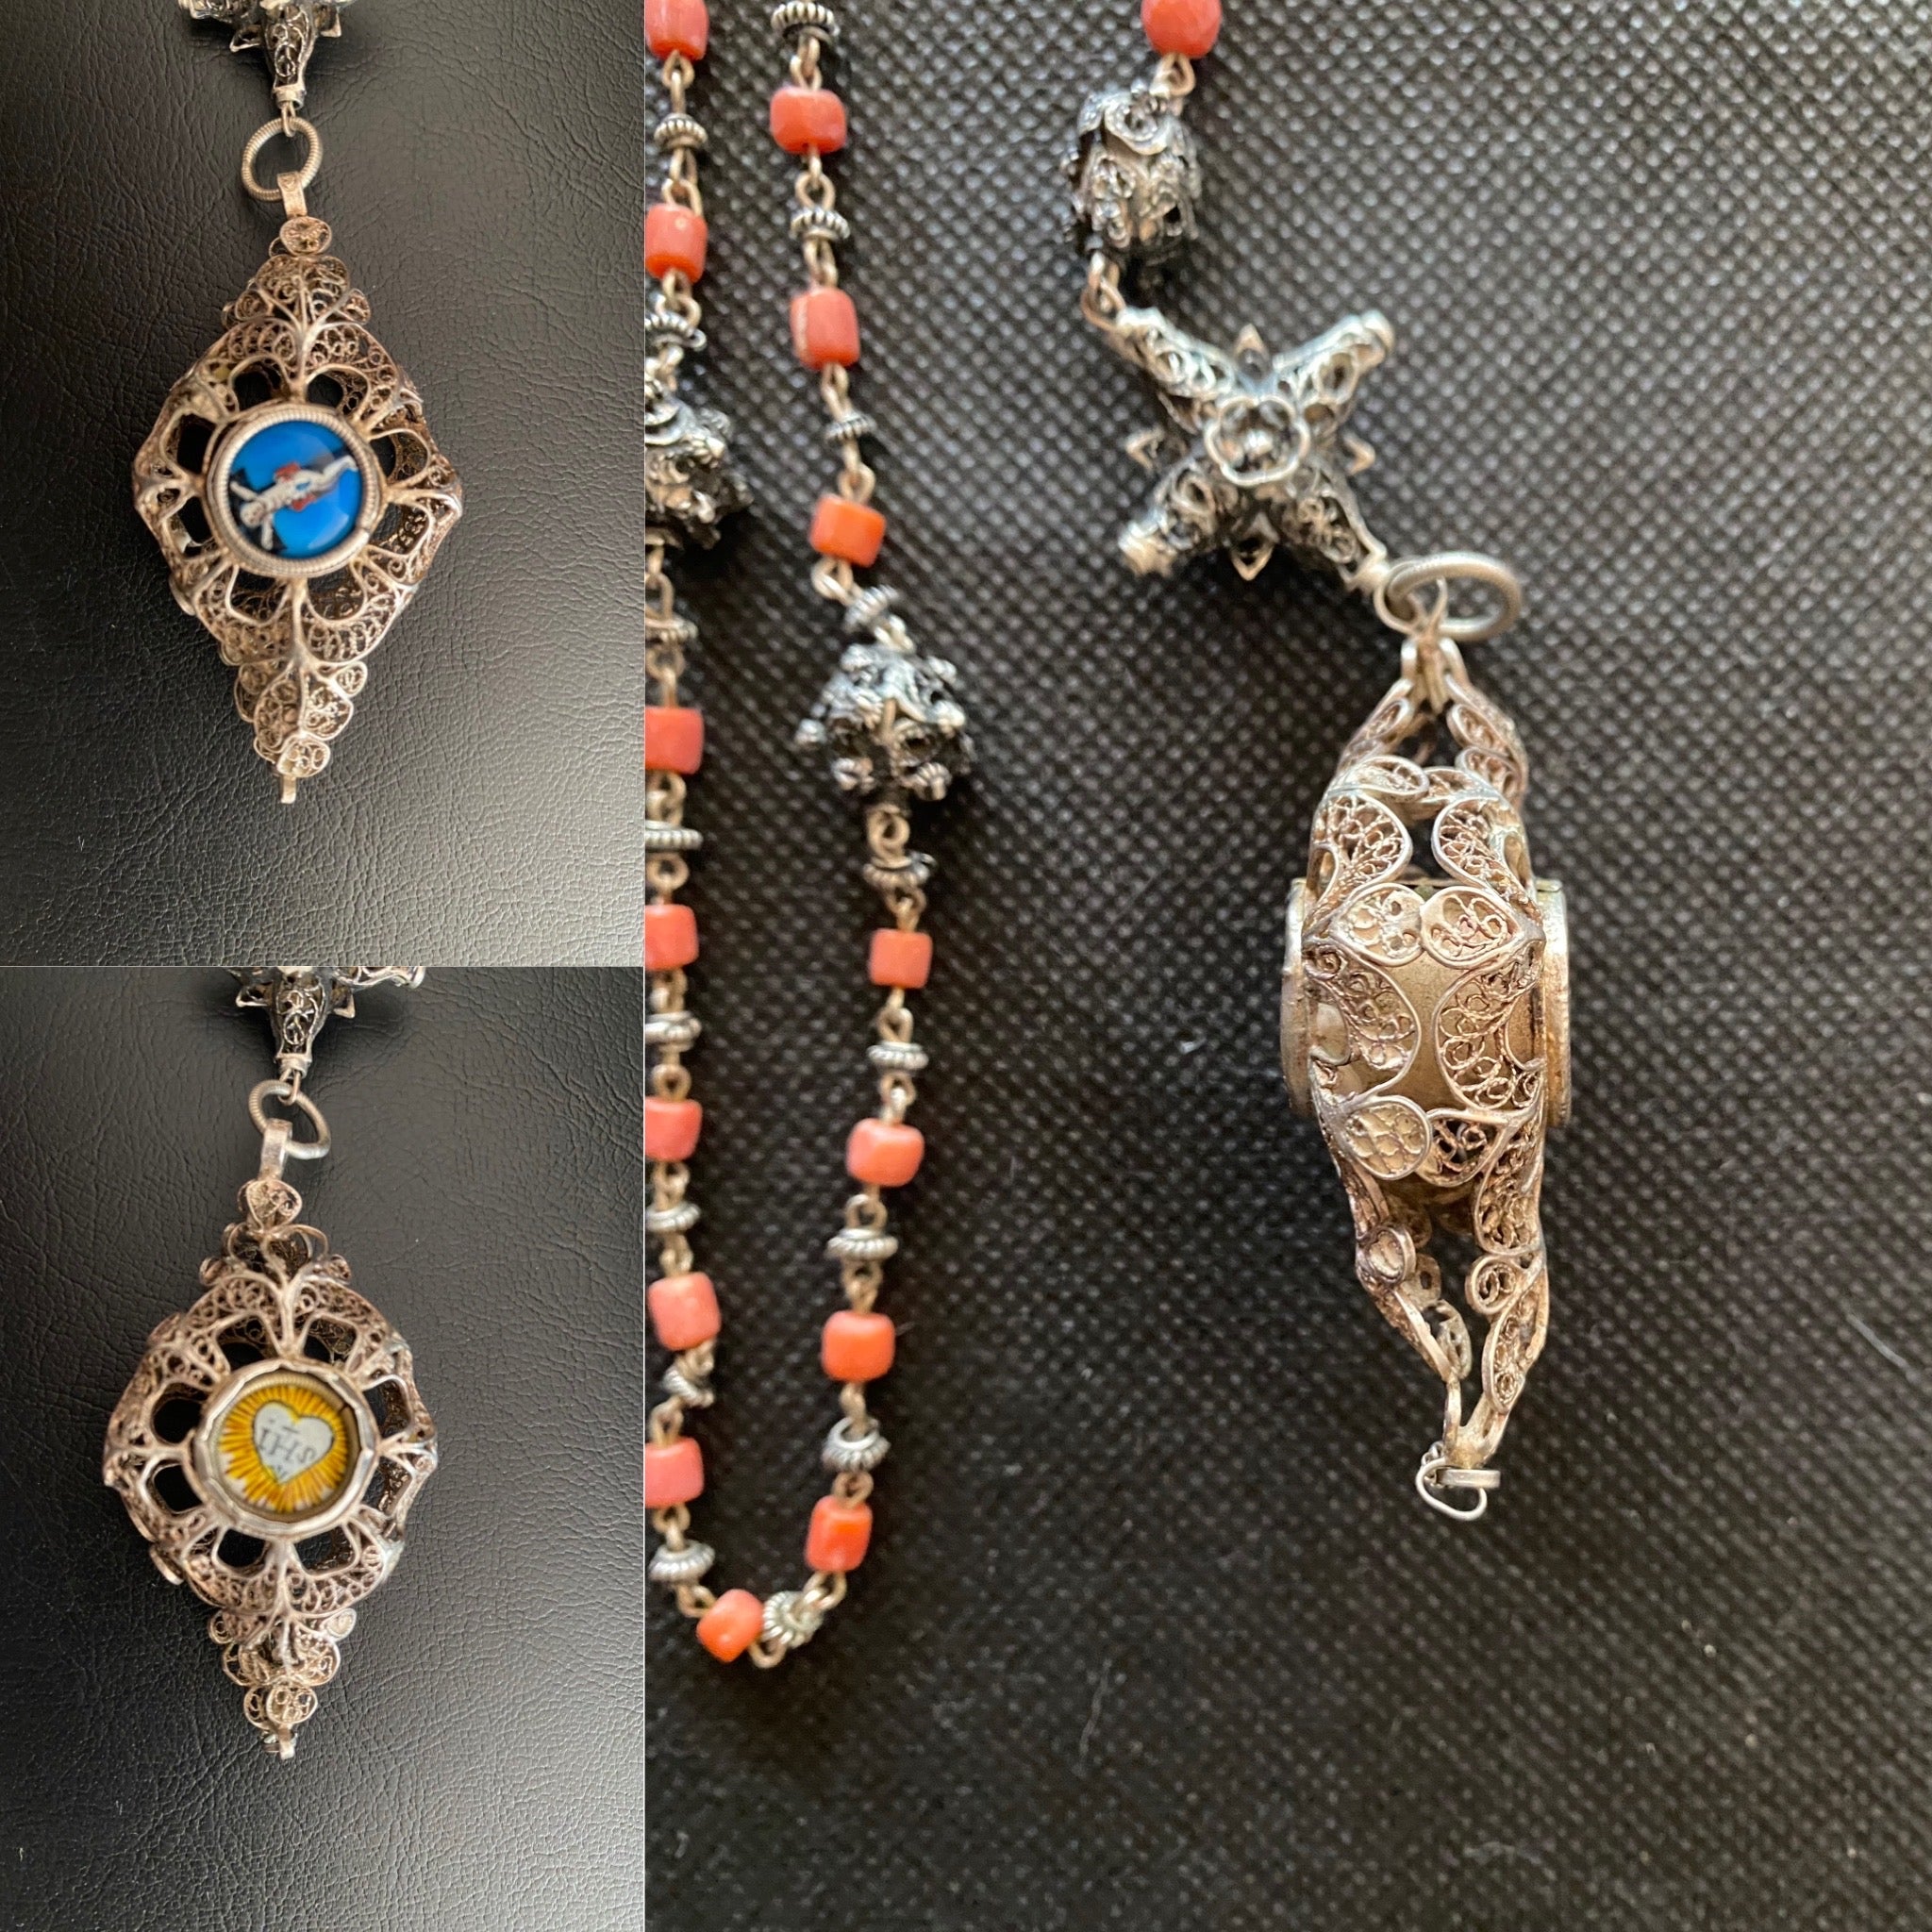 Antique Rosary With Relic, silver filigree Cross and mediterranean coral beads. 17th century Italy